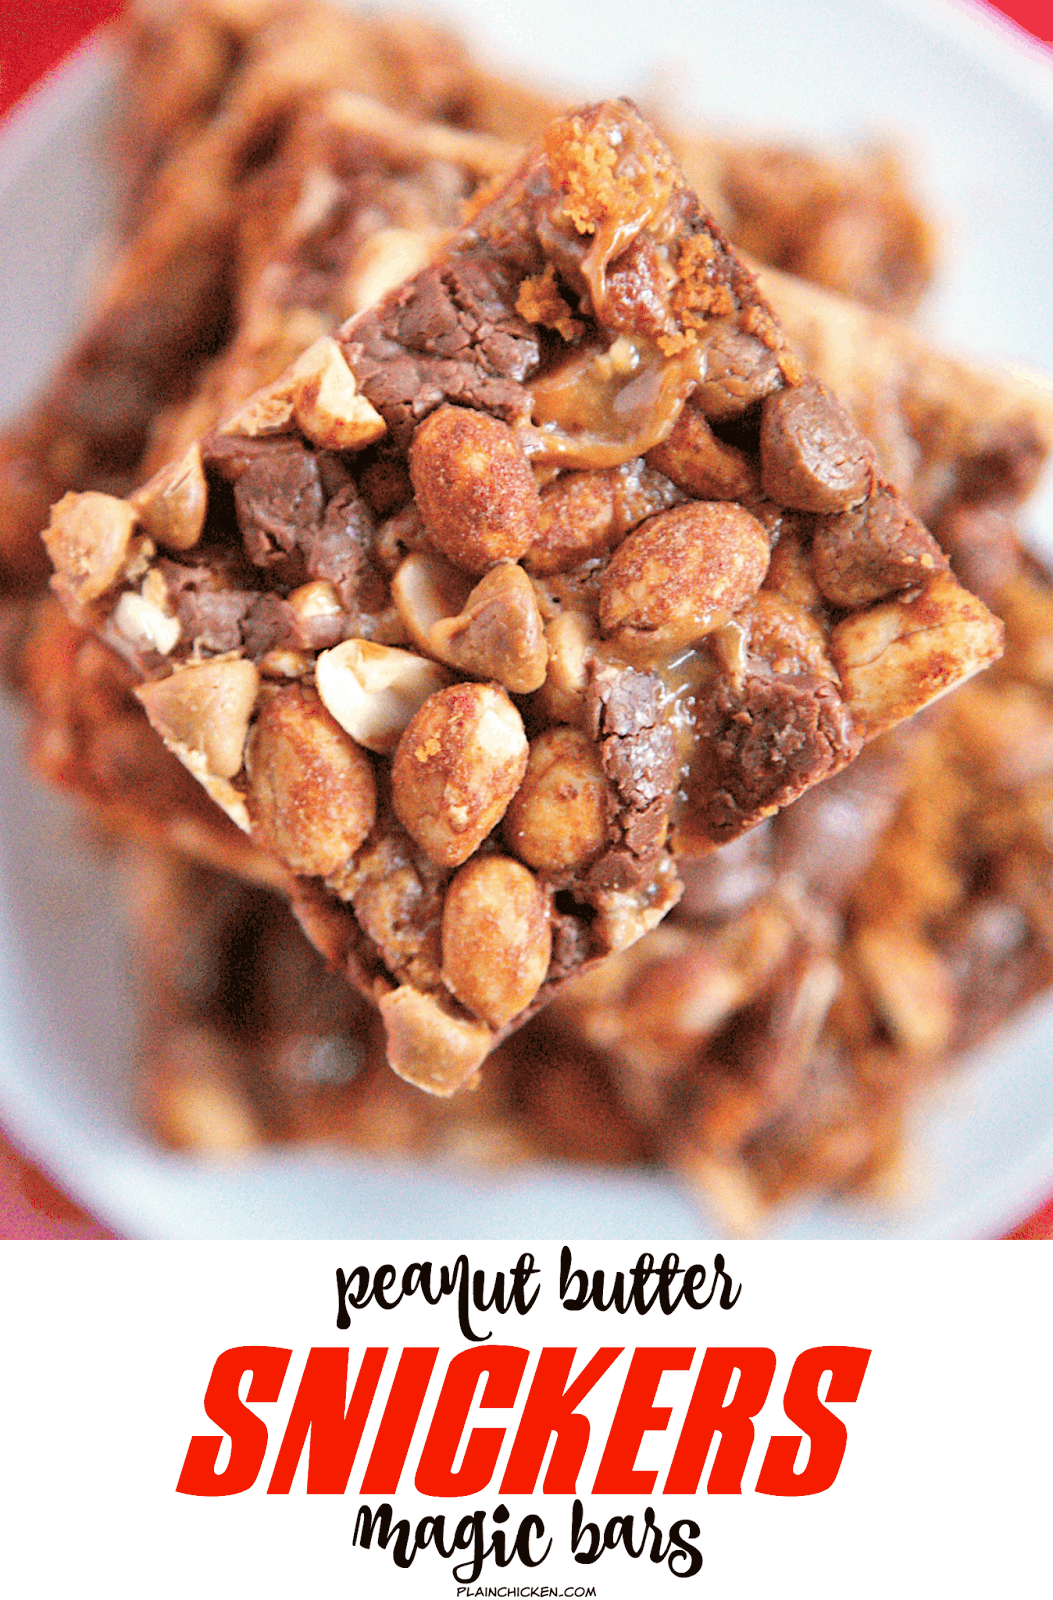 Peanut Butter Snickers Magic Bars - snickers baking bites, peanut butter chips, honey roasted peanuts on top of a graham cracker crust and drowned in sweetened condensed milk. SO easy to make and SOOO delicious! Everyone raved about them!